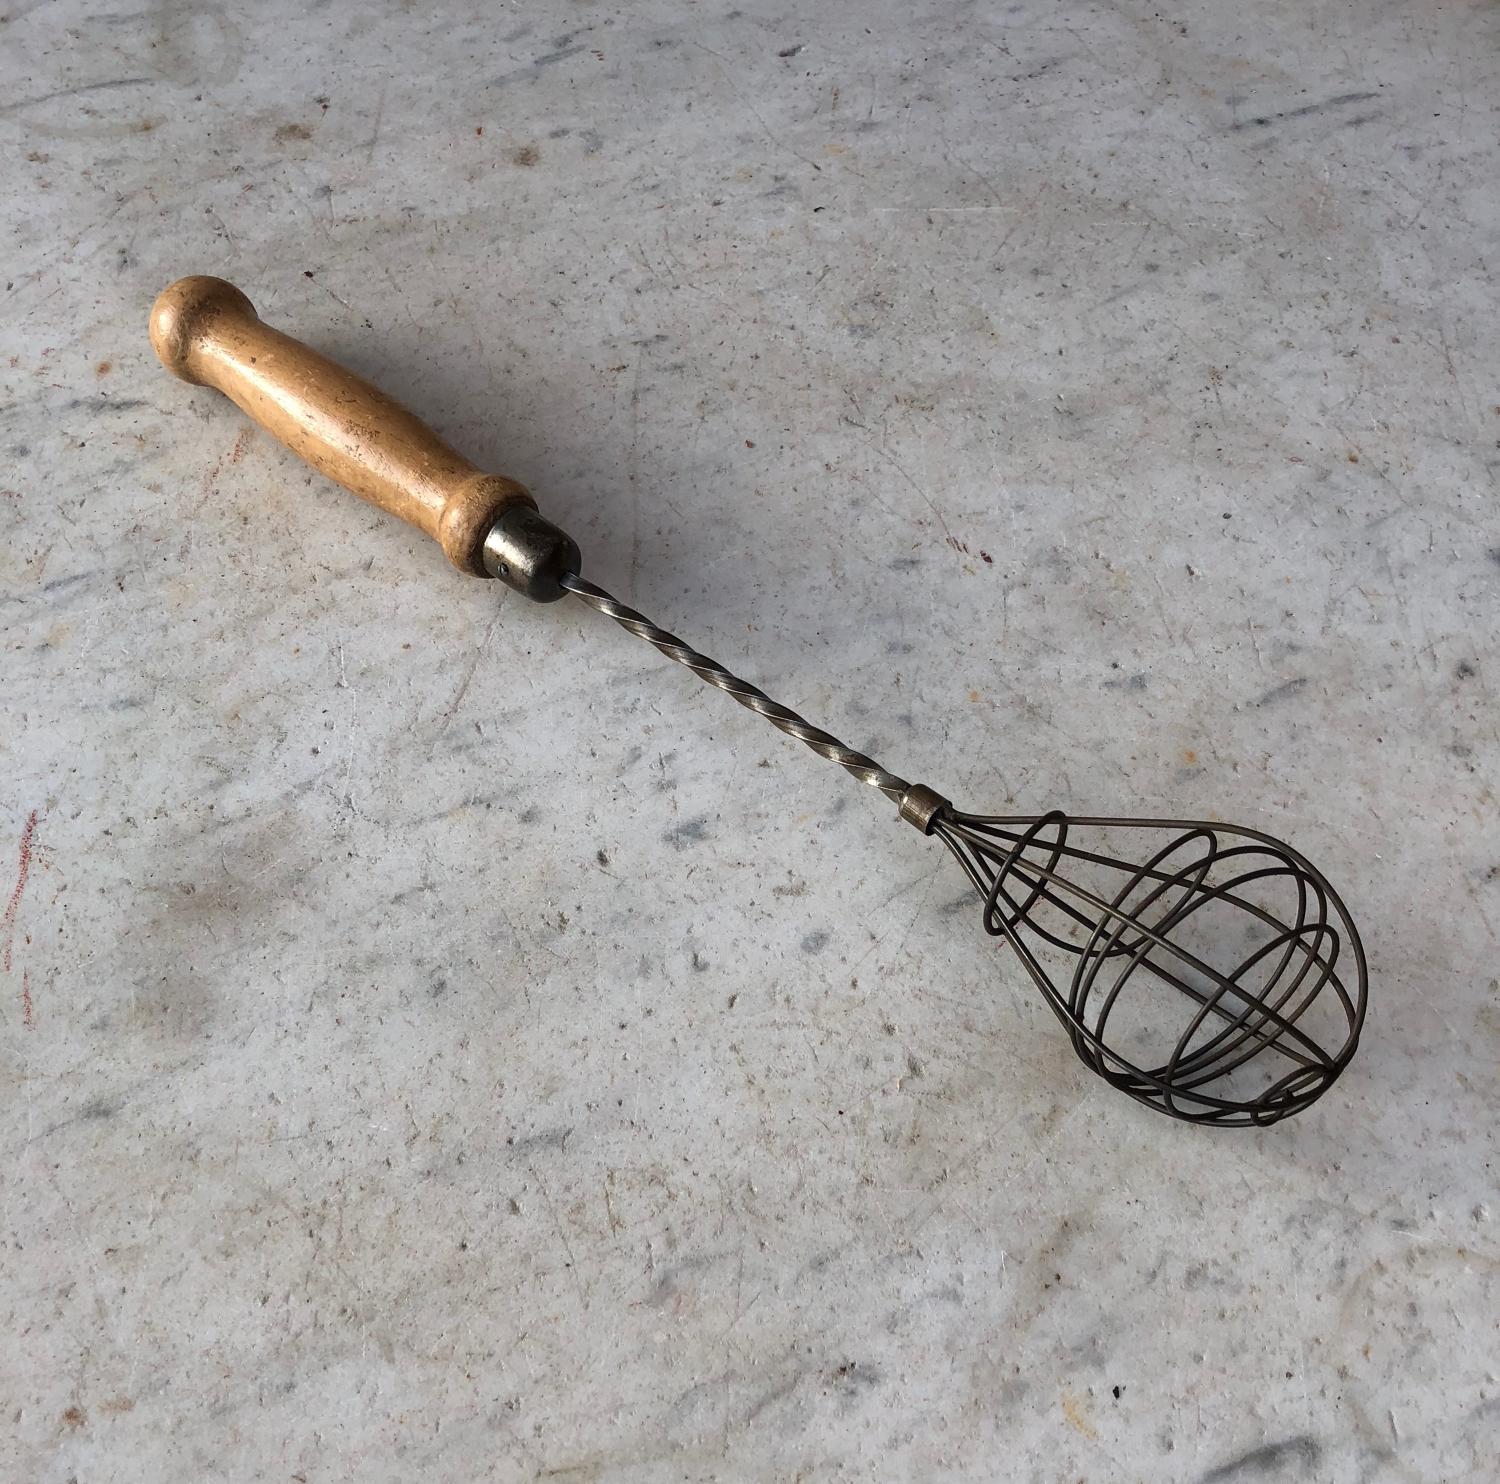 Antique Ornate Wire Work Push Down Whisk